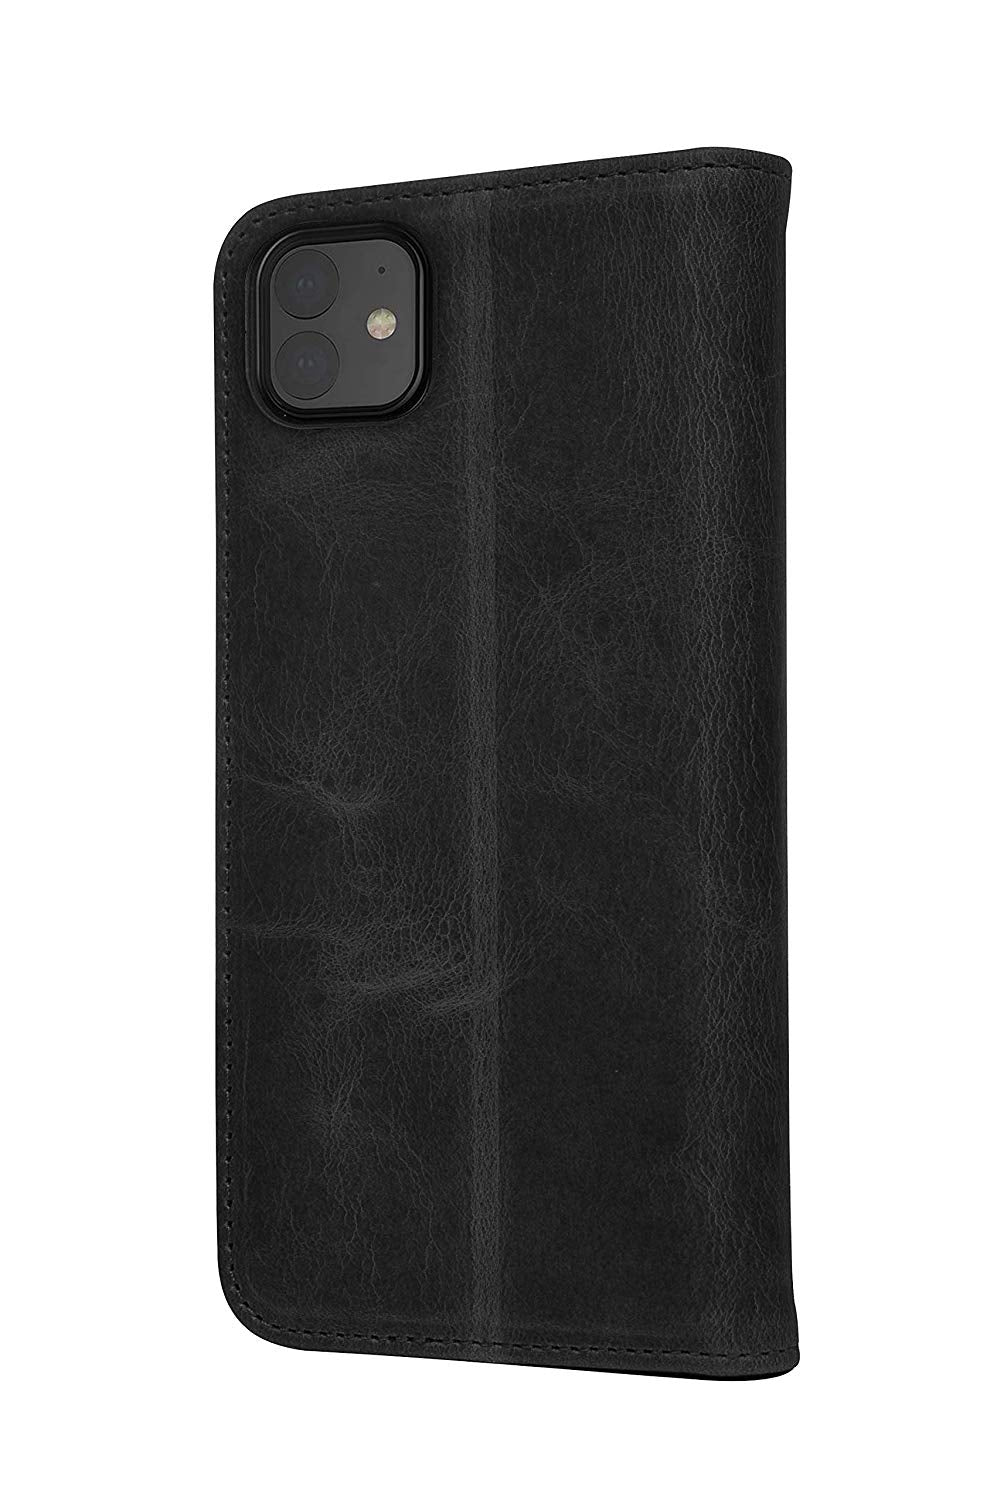 iPhone 11 Leather Case. Premium Slim Genuine Leather Stand Case/Cover/Wallet (Pure Black)